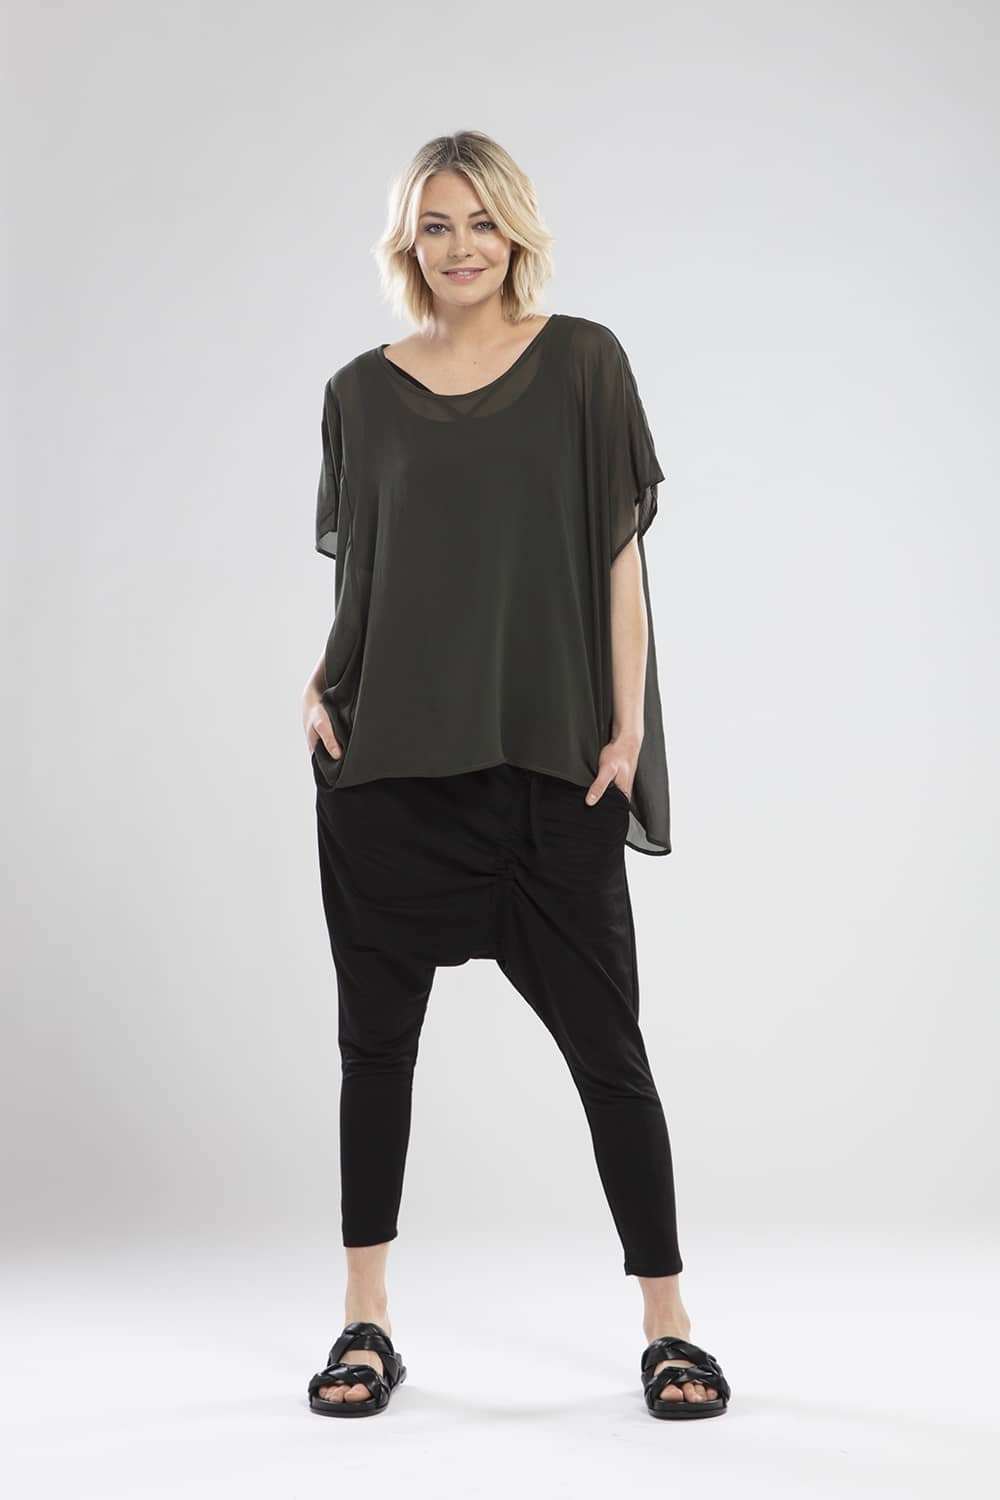 NES CIVITA TOP  The Nes Civita Top is a sheer staple for everyday wear. Crafted from 100% polyester, this easy to wear top is loose and flowing, with angled sleeves and a slight drop tail, featuring a split detail on the left side, ideal for tying up or tucking in.   See the Nes Civita Top teamed back with the Nes Roxi Pant in black  Sizes S/M , M/L 100% Polyester Angled sleeves Slight drop tail Left side split detail